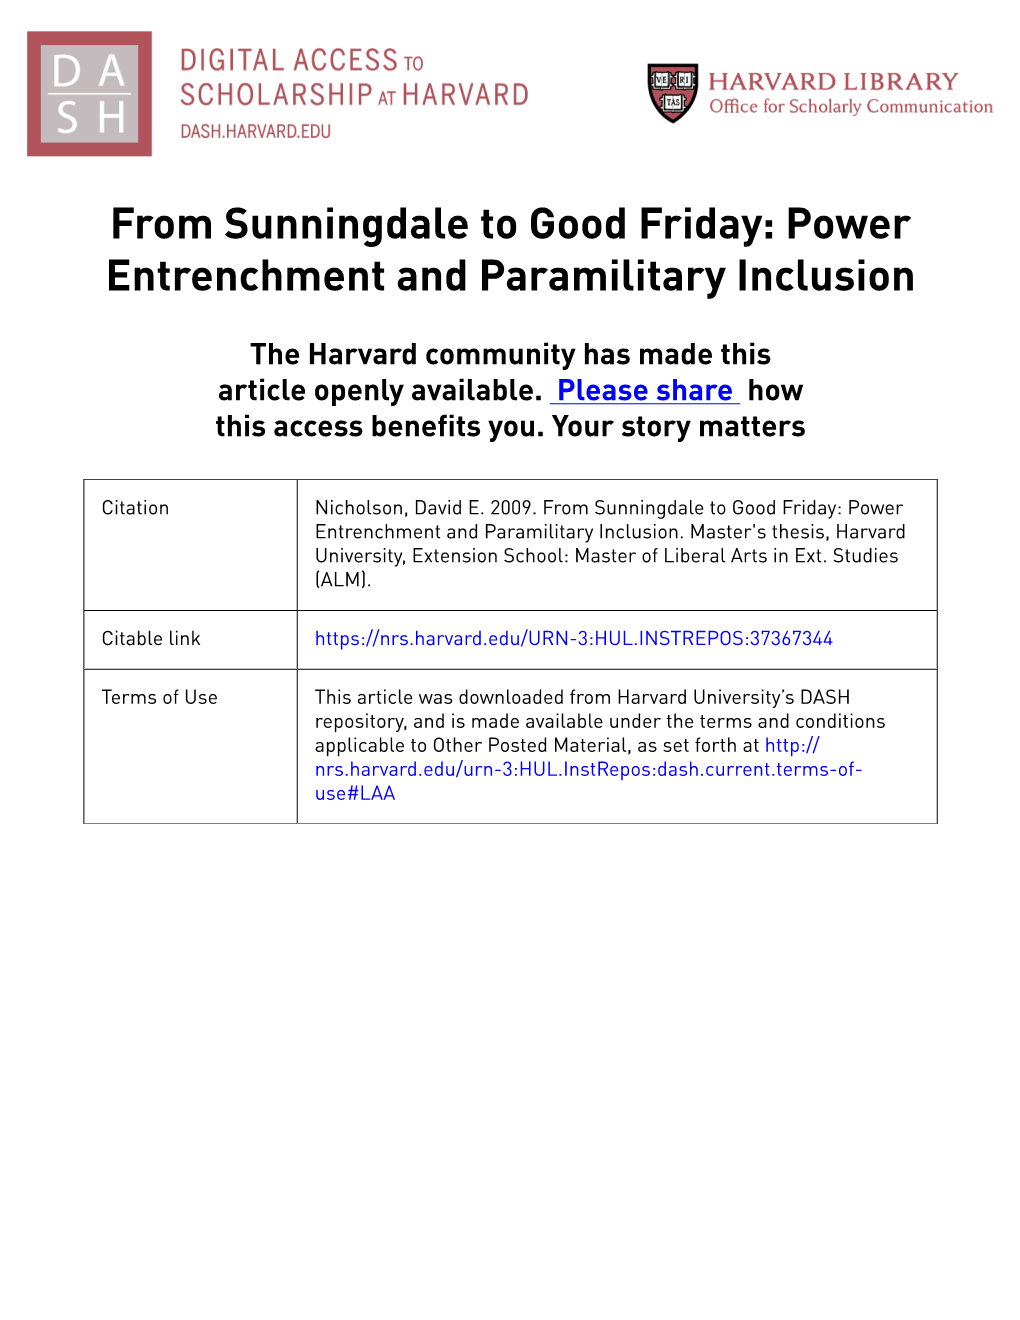 From Sunningdale to Good Friday: Power Entrenchment and Paramilitary Inclusion